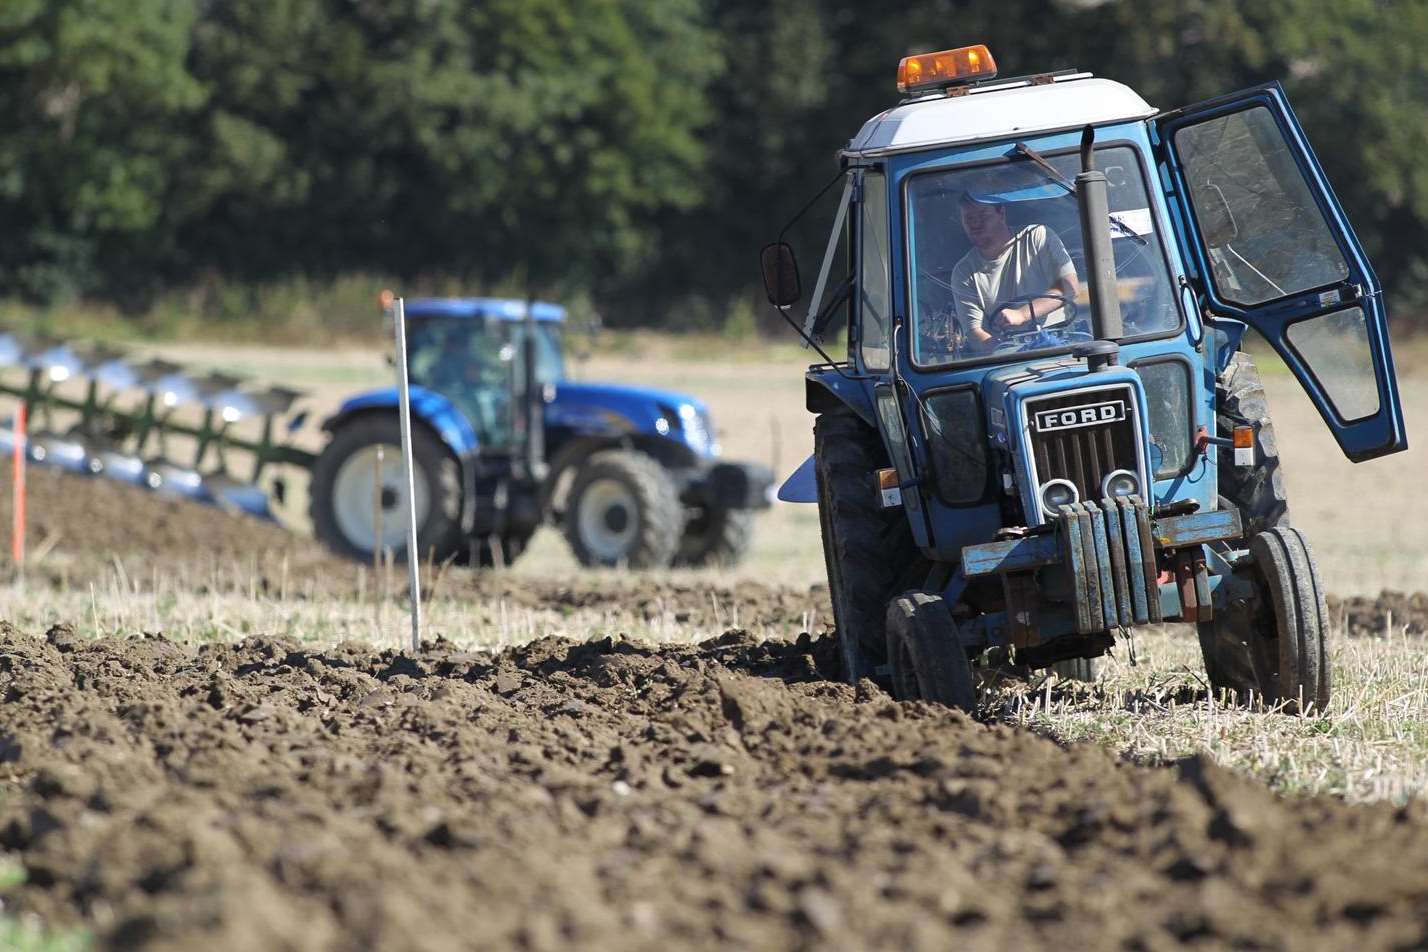 Rural crime cost Kent's economy £1.8m in 2013